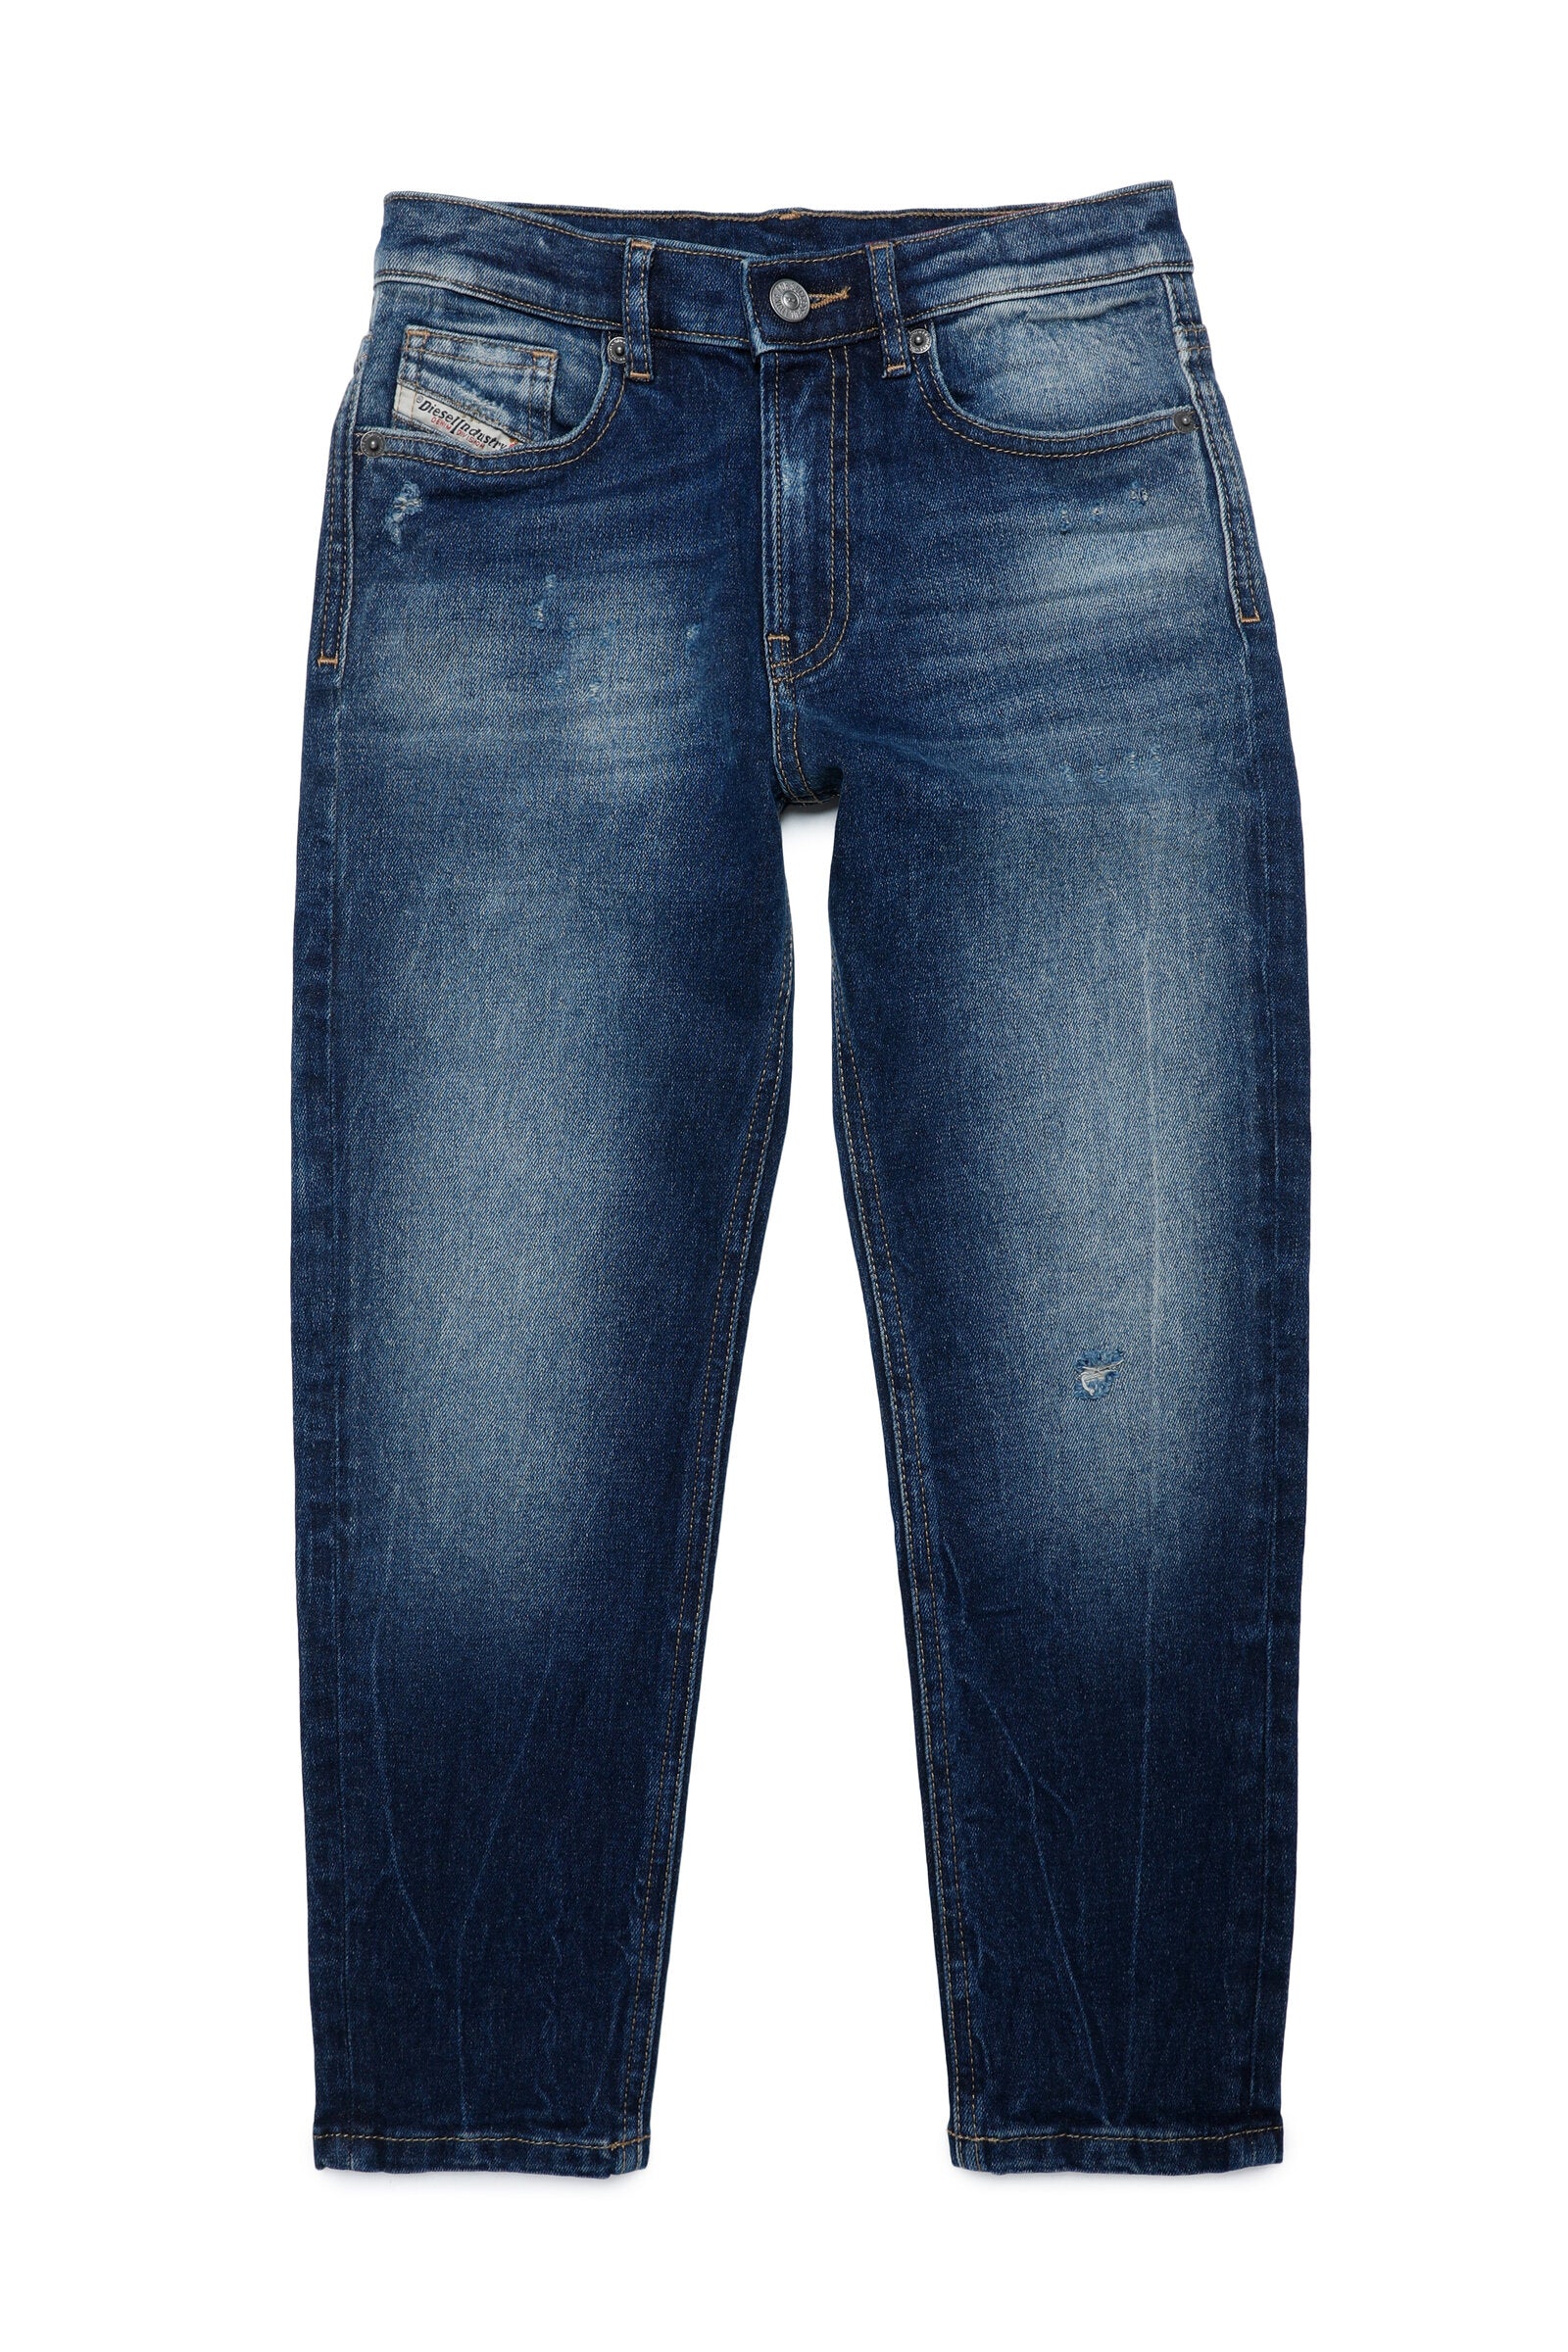 Jeans D-Lucas tapered dark blue  with rips